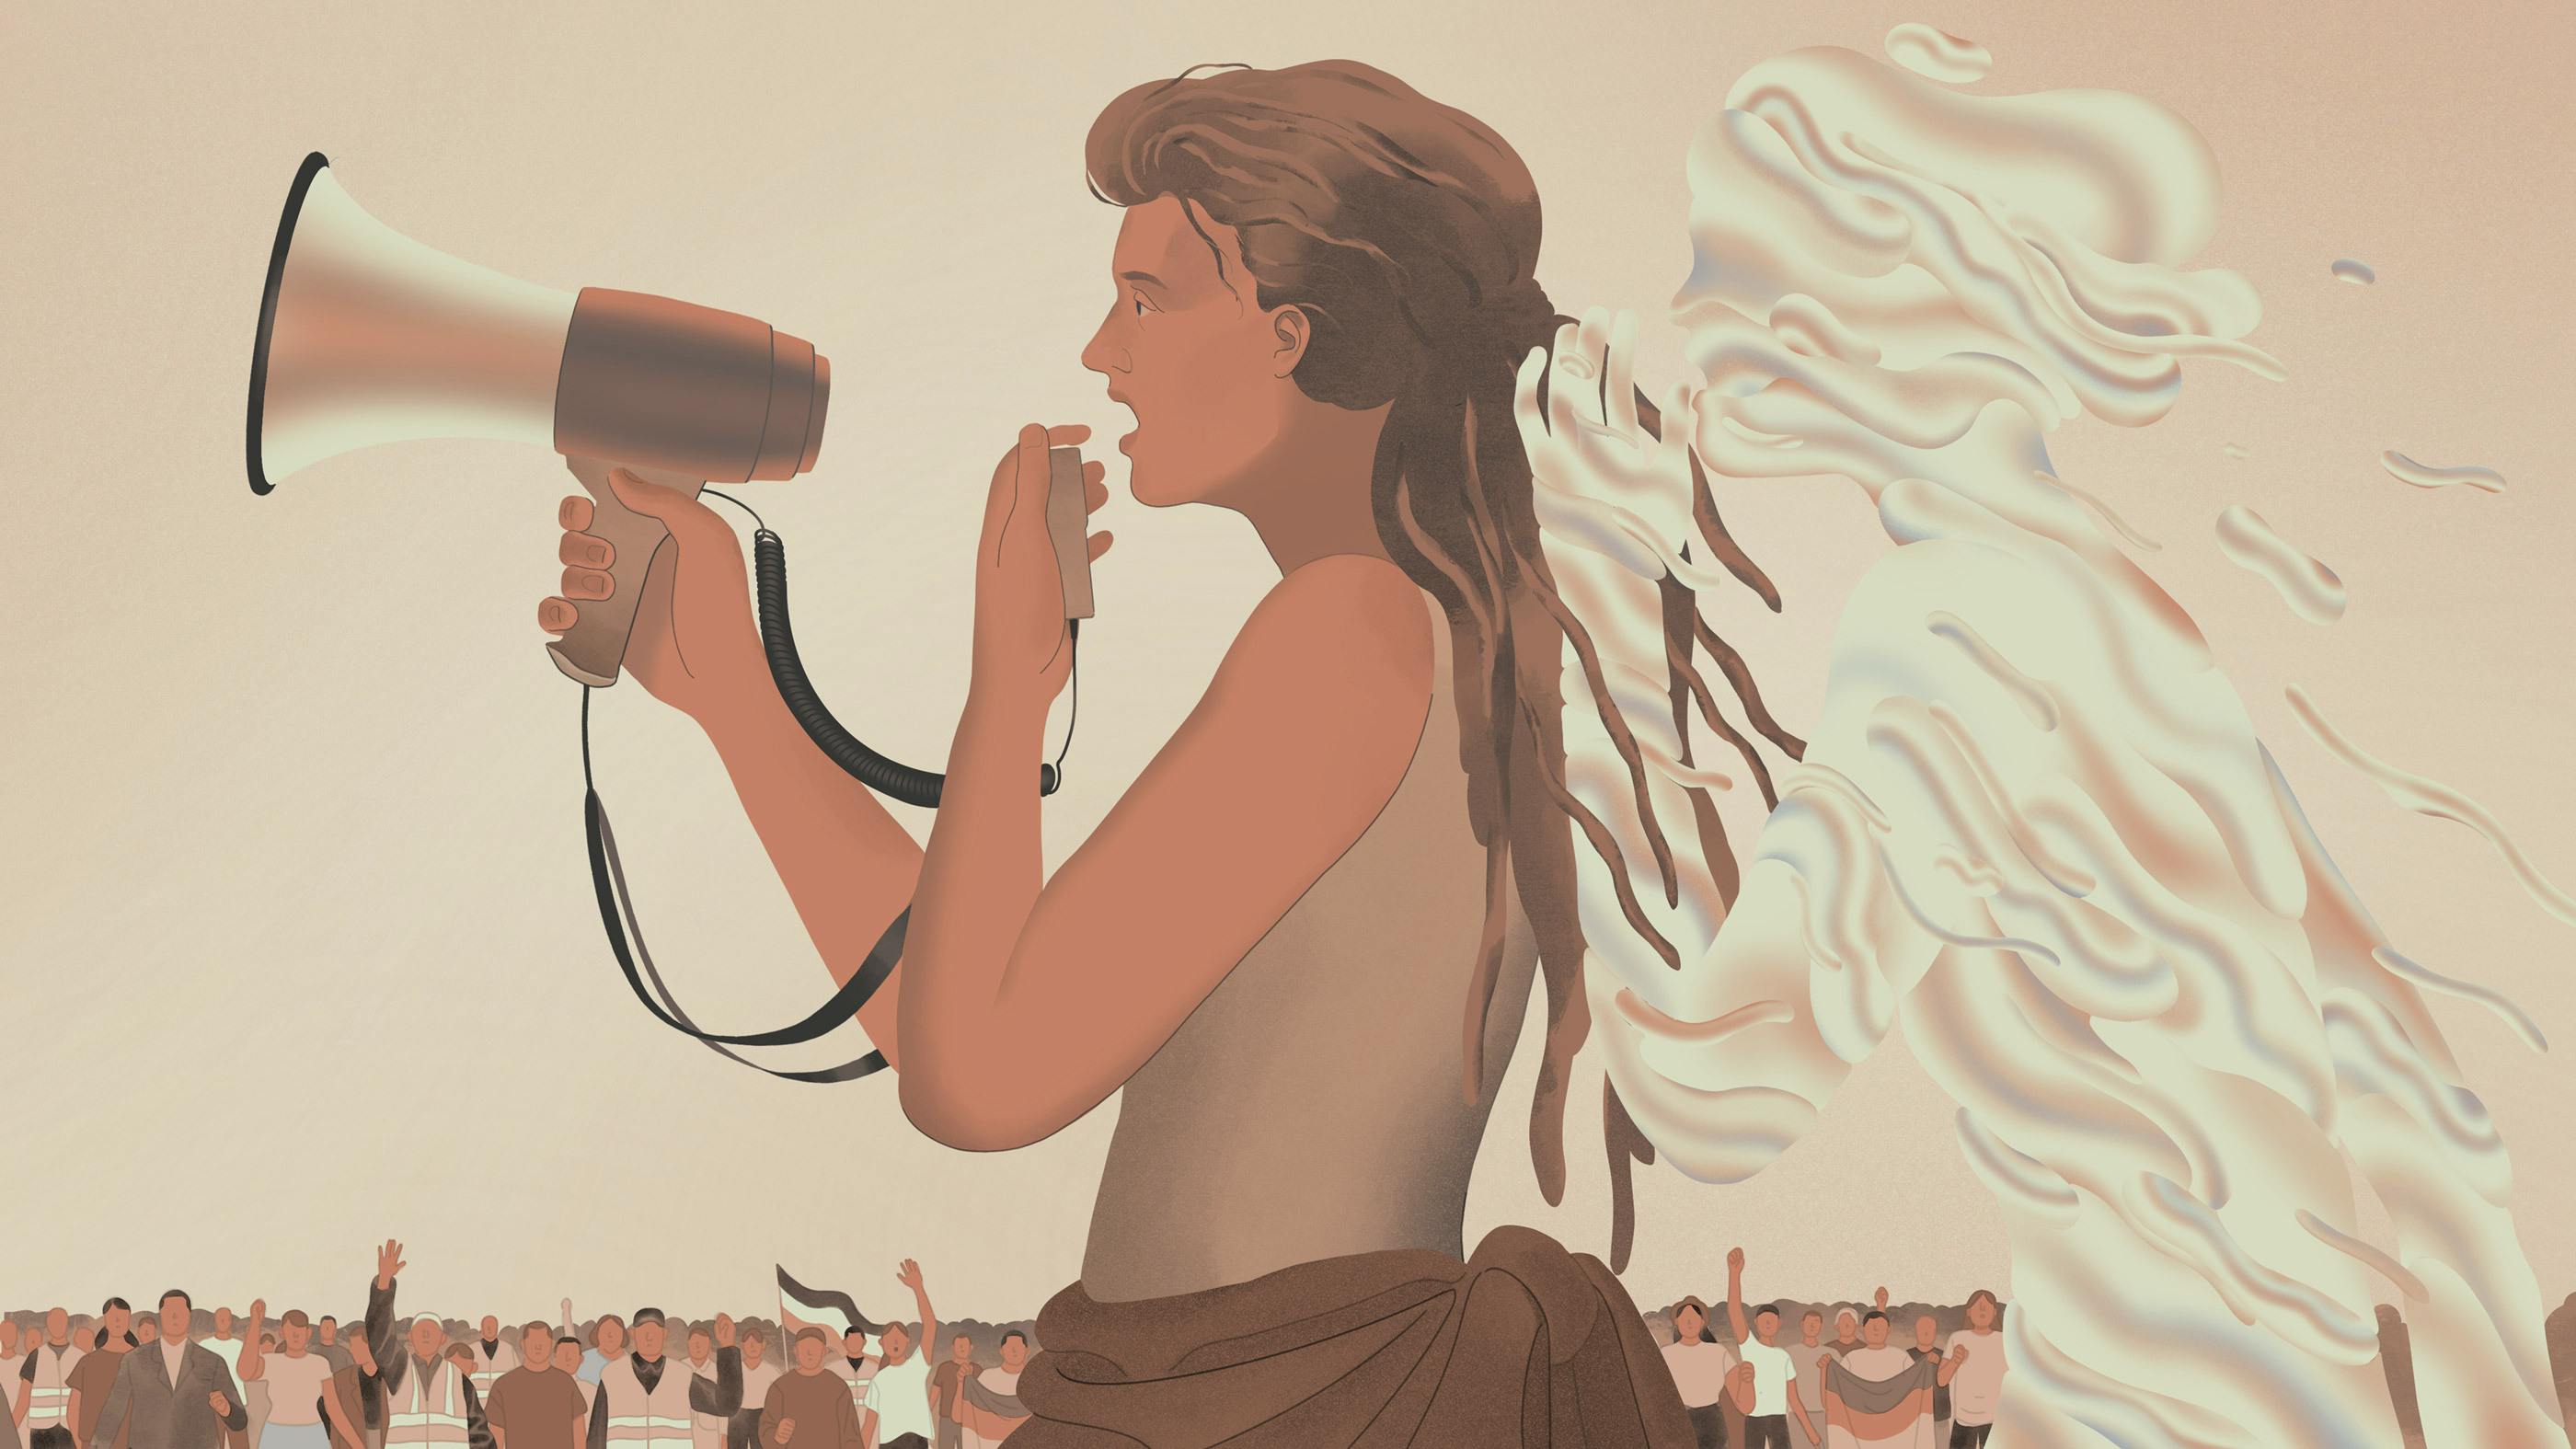 Woman holding a megaphone. Illustration by Jun Cen for part 3, the storming.